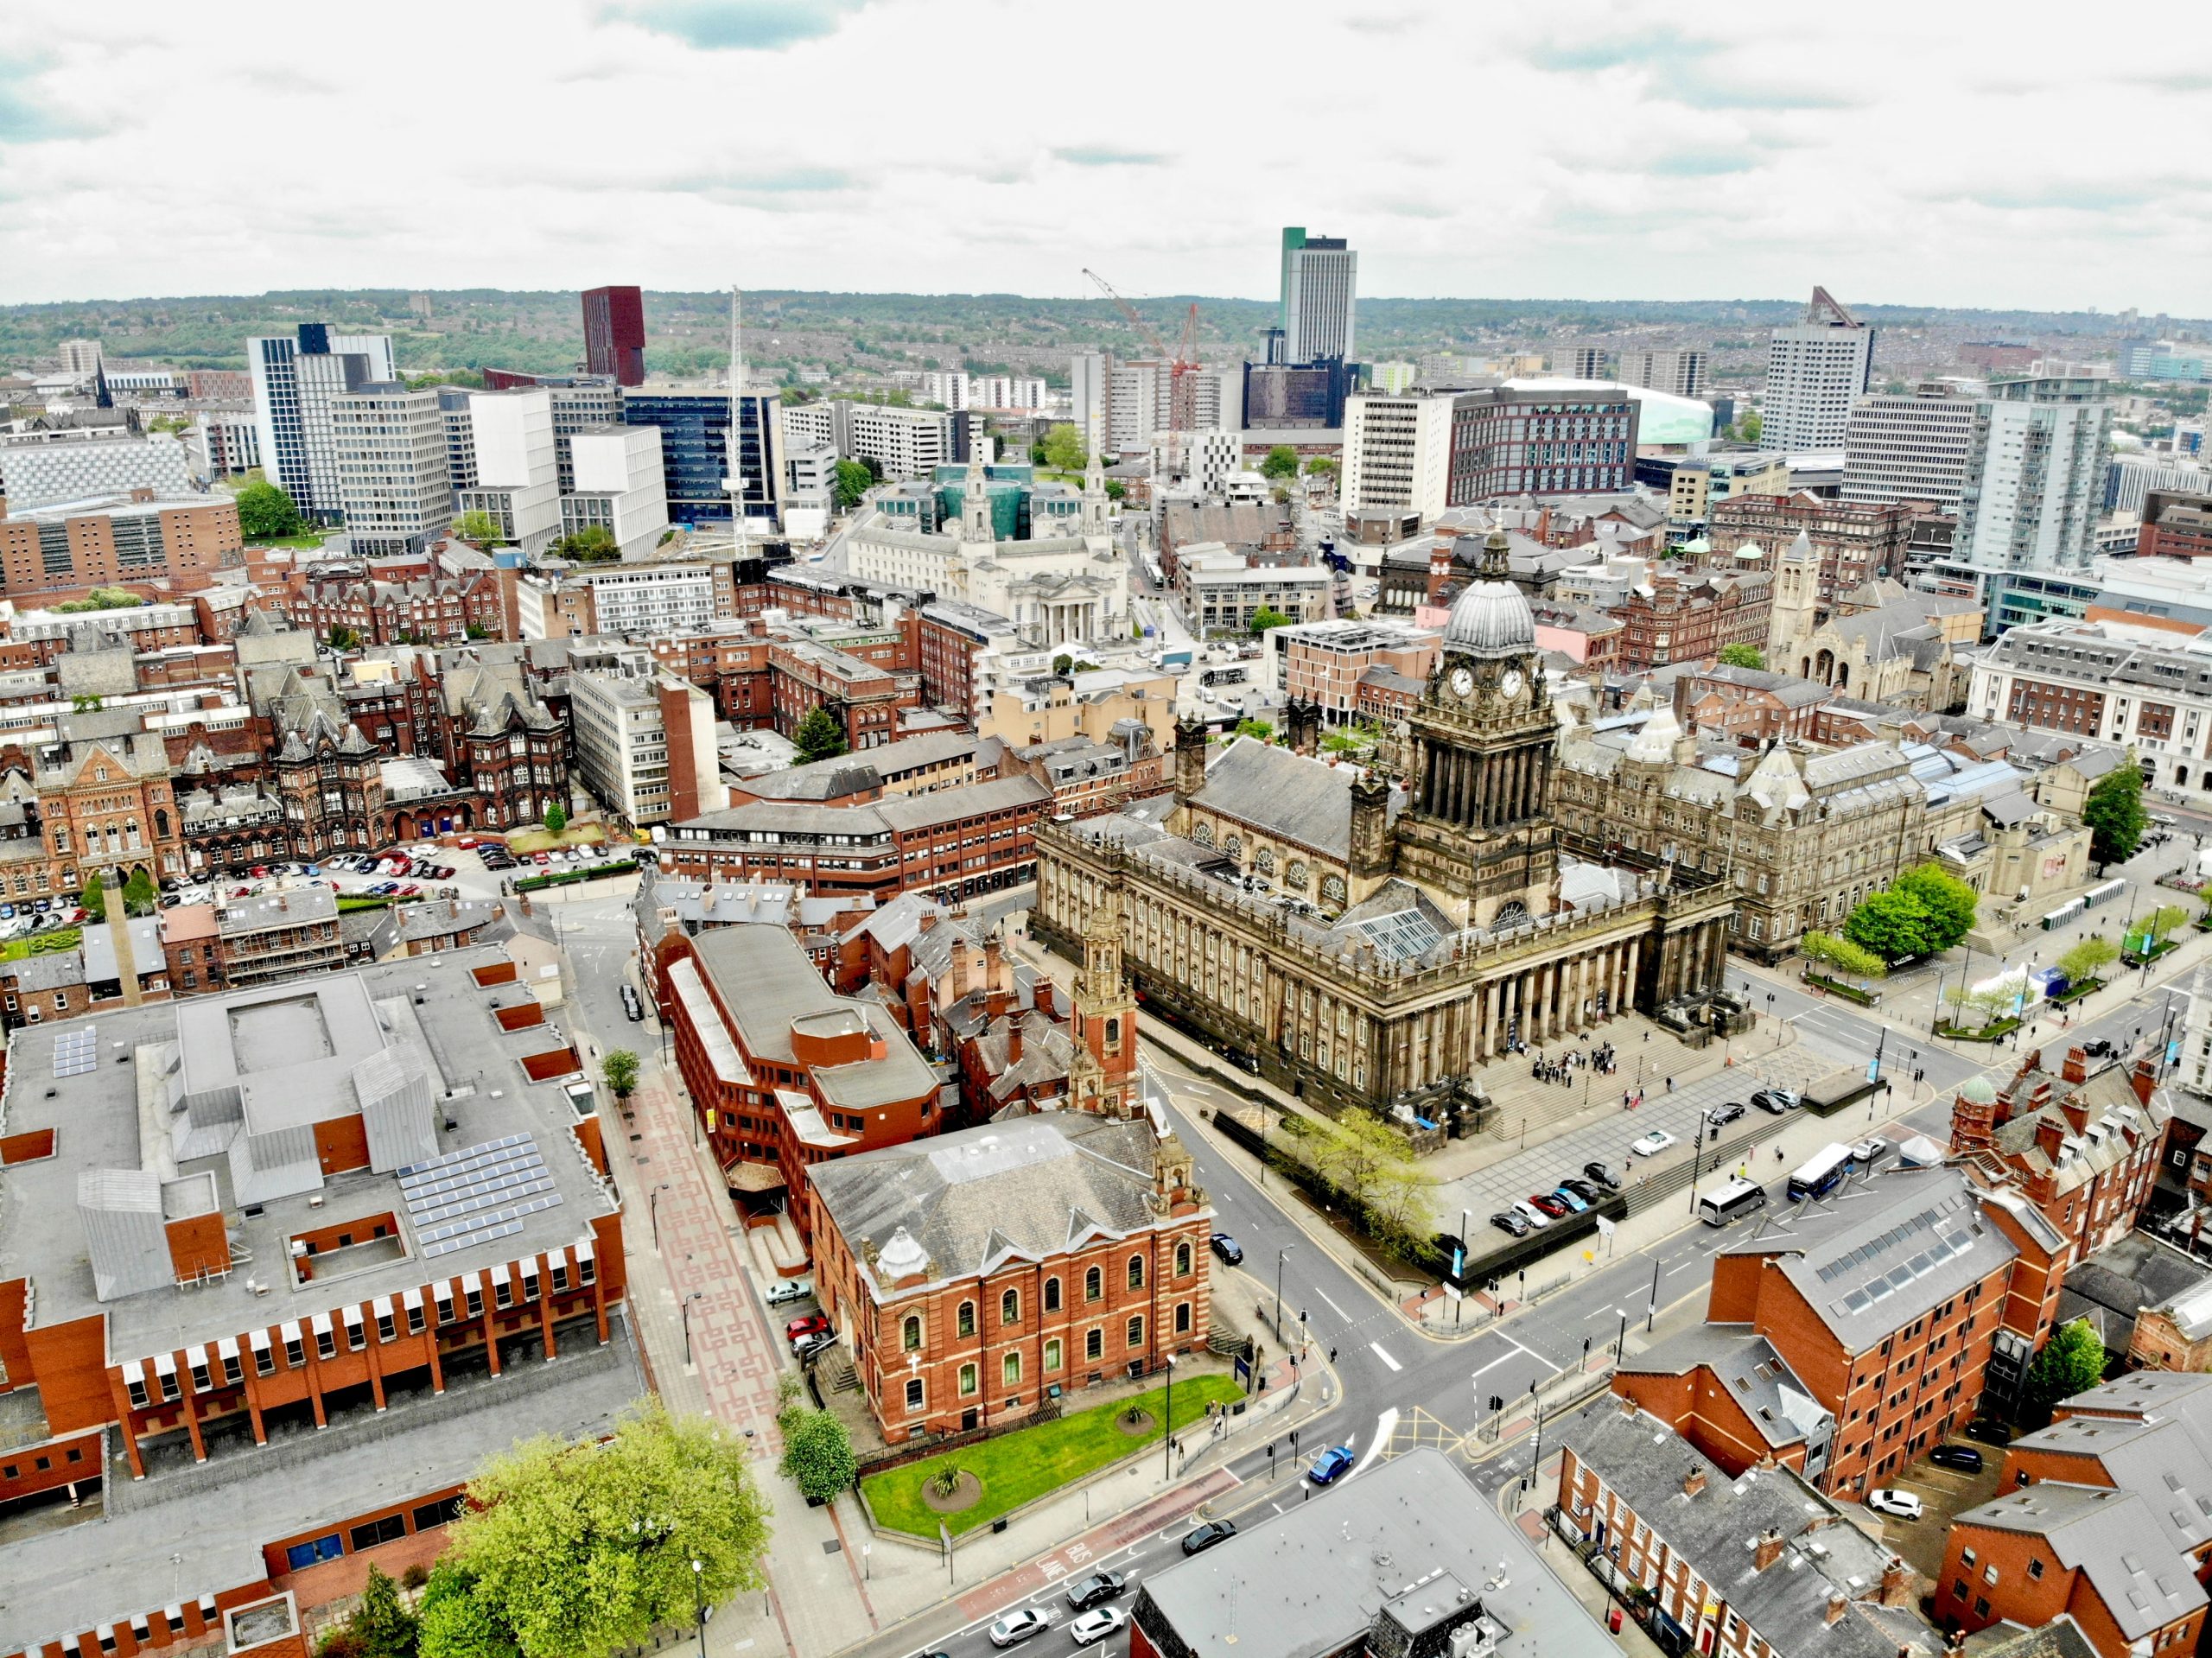 Leeds city as seen from above